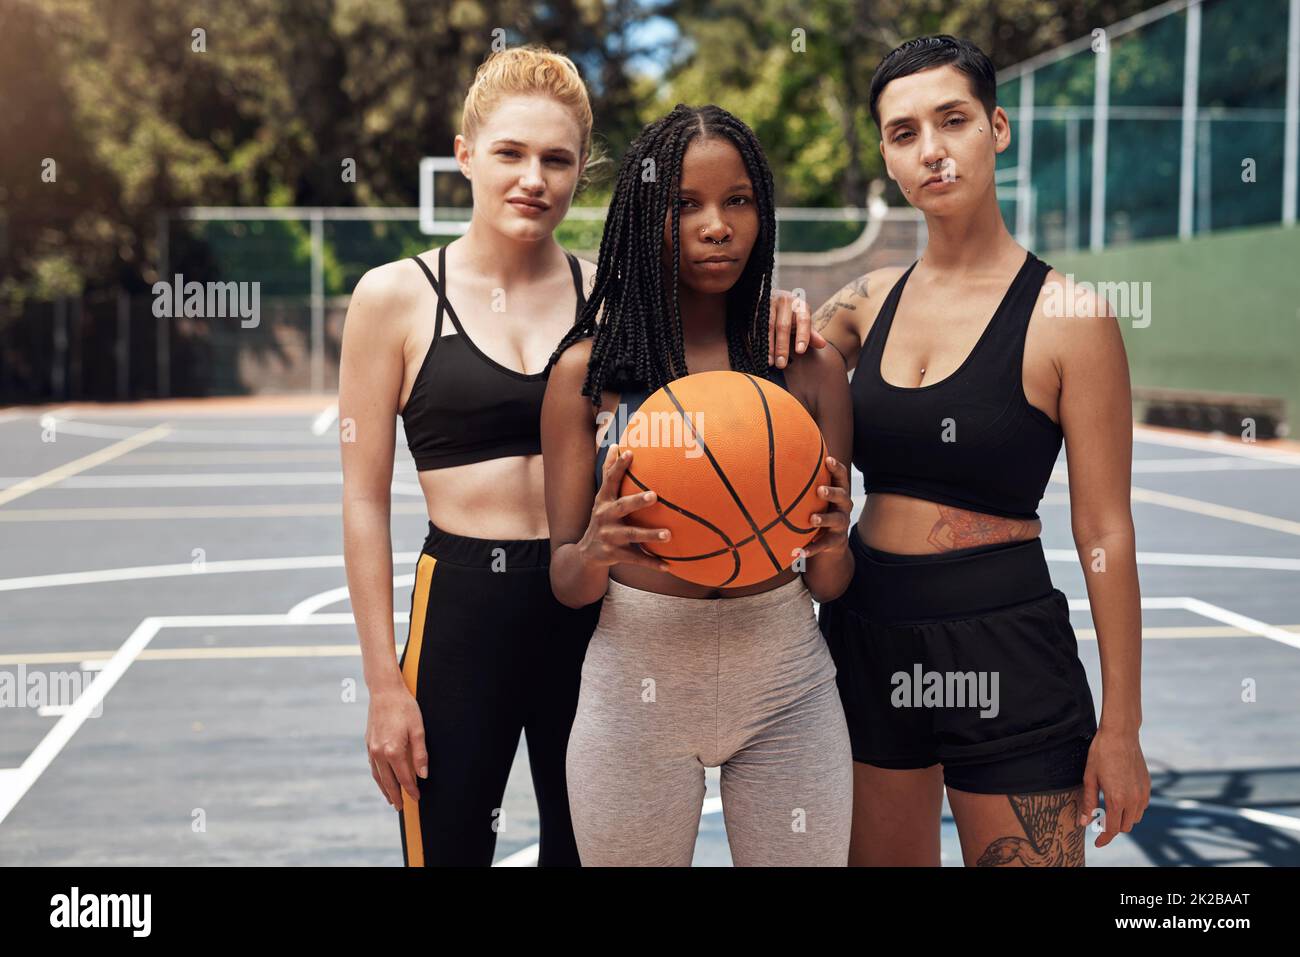 Winners dont wait for chances, they take them. Portrait of a group of sporty young women standing together on a sports court. Stock Photo